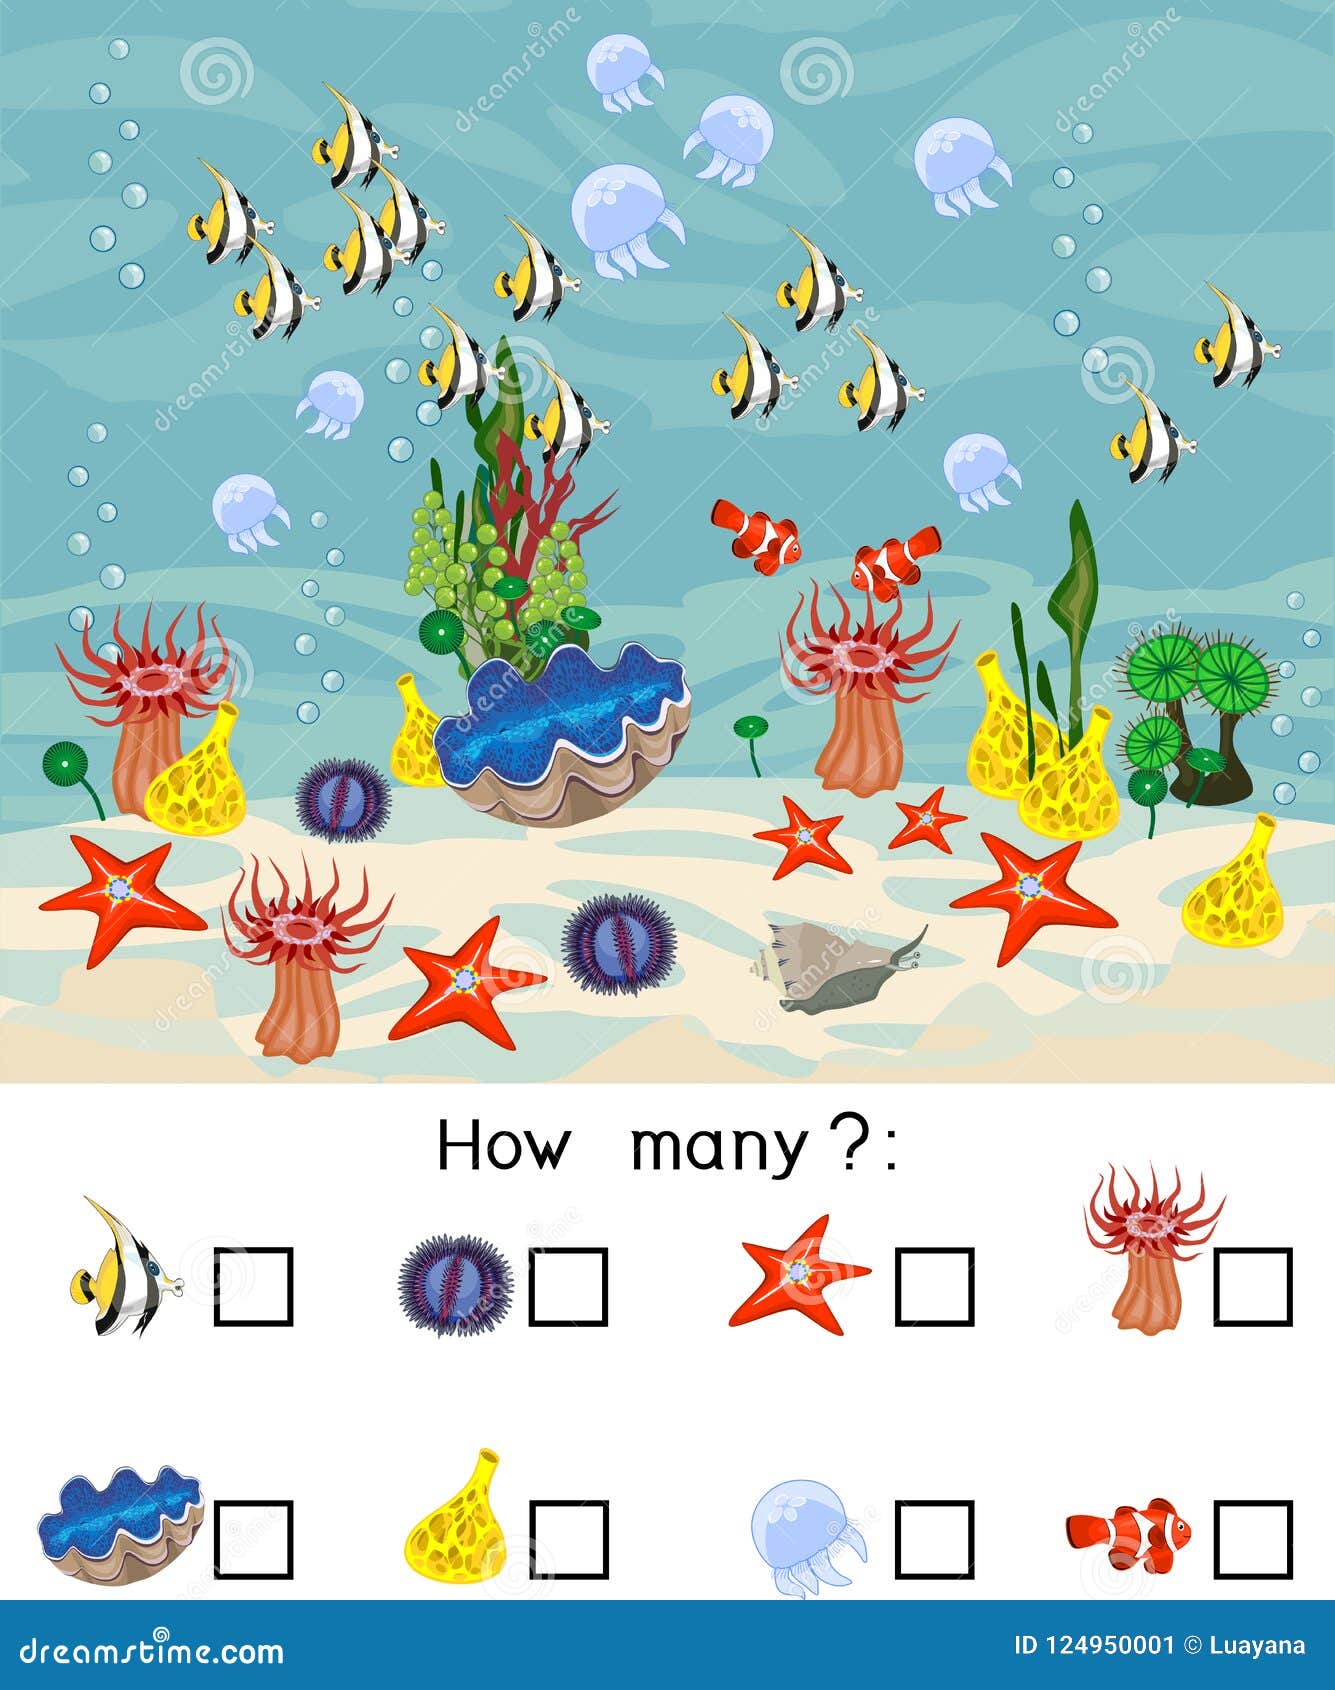 how many different underwater marine animals. counting educational game with different sea animals for kids